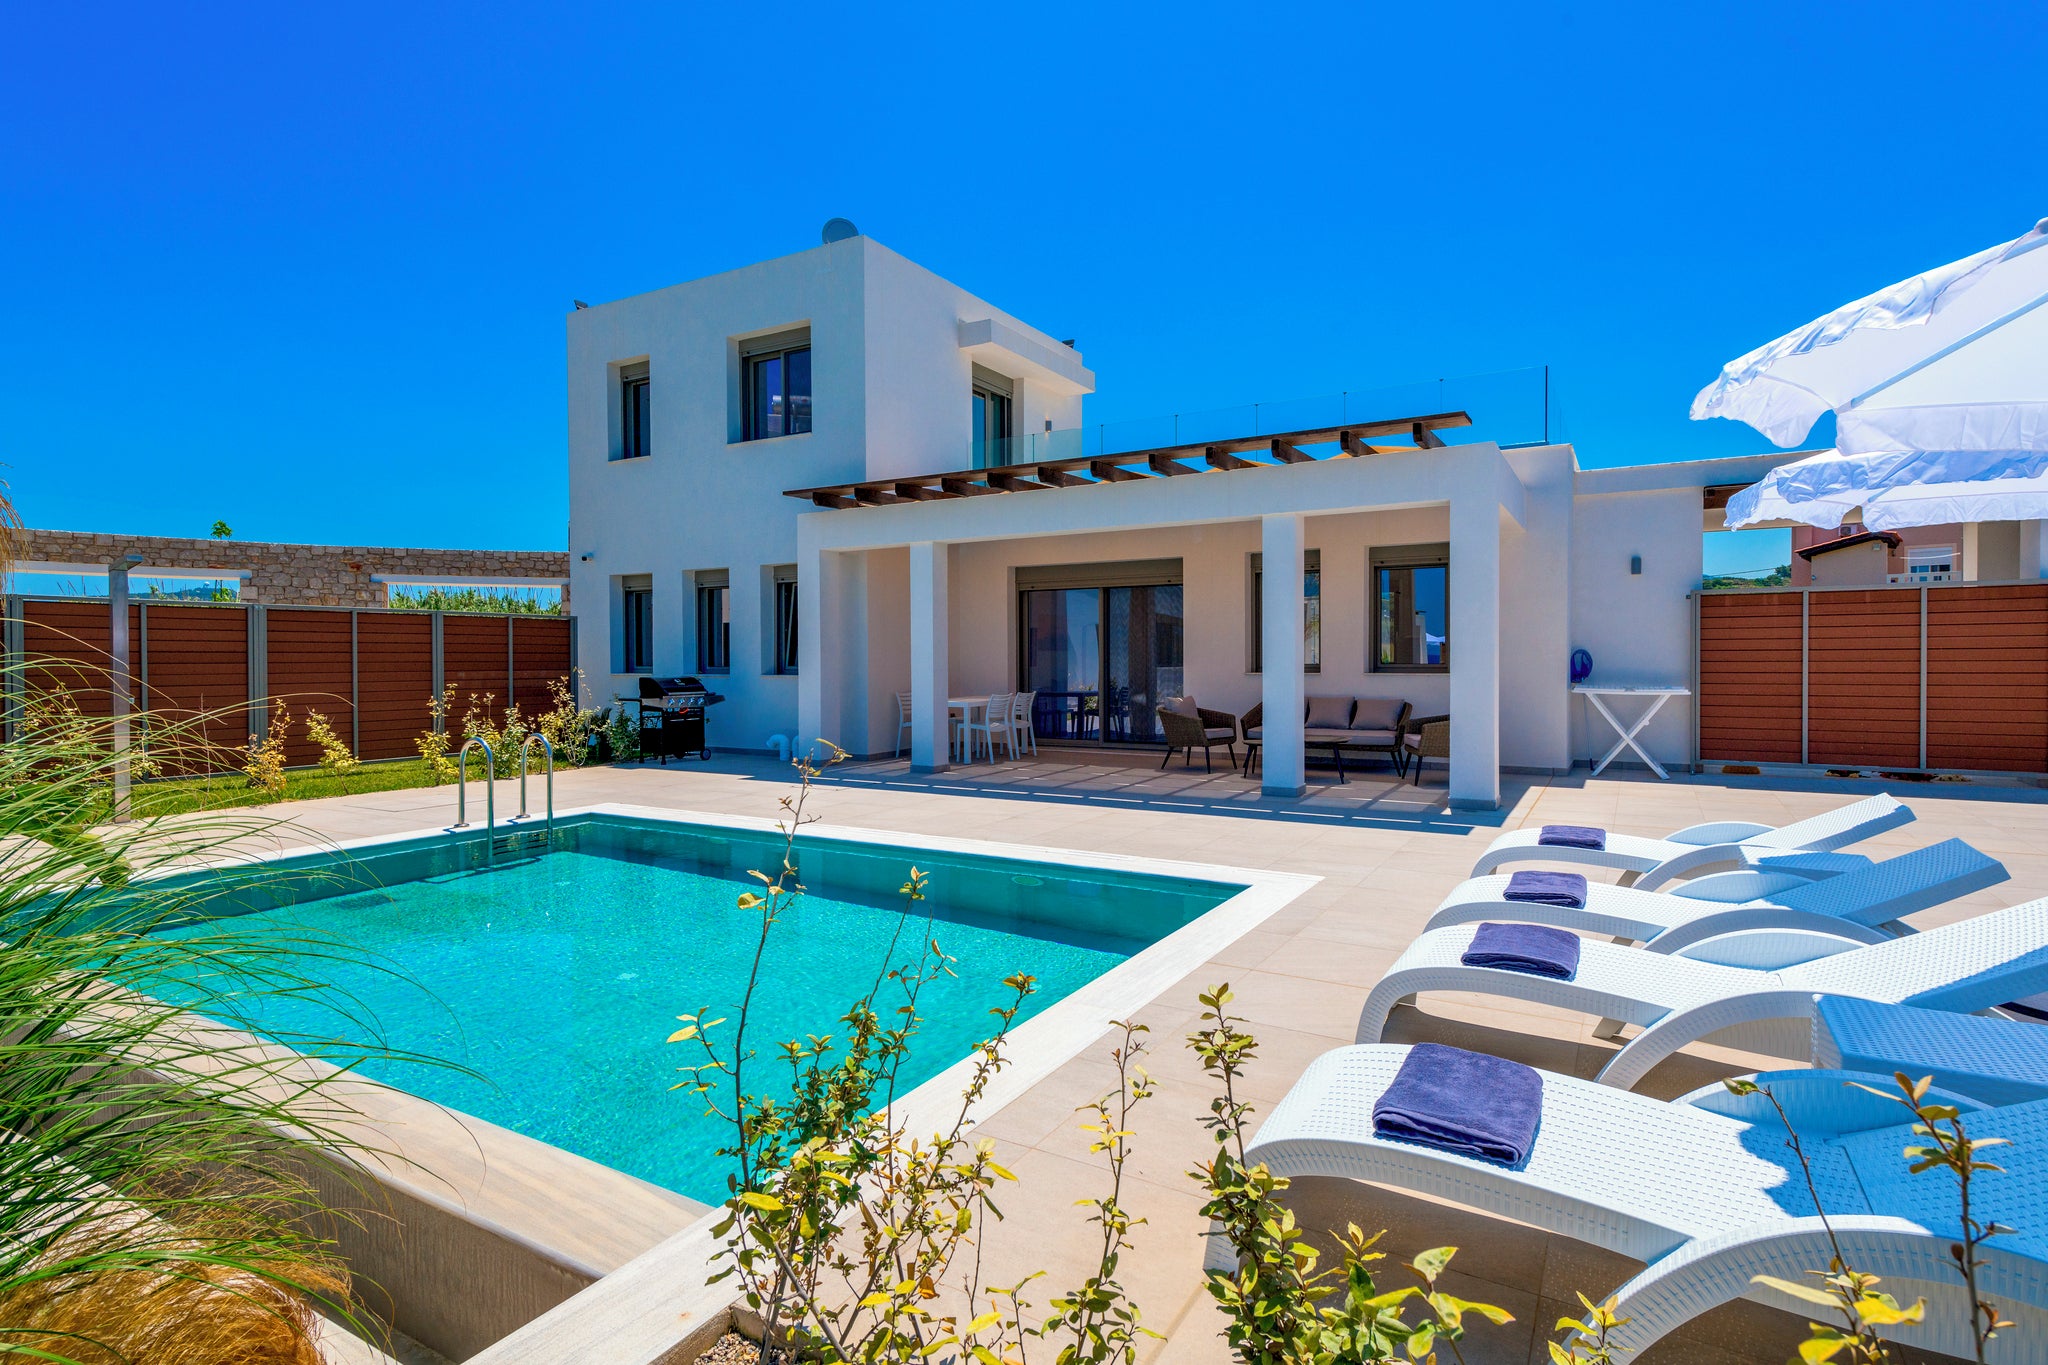 Spend days lounging by the pool or on Theologos beach with a stay at Villa Panaxia Kohille